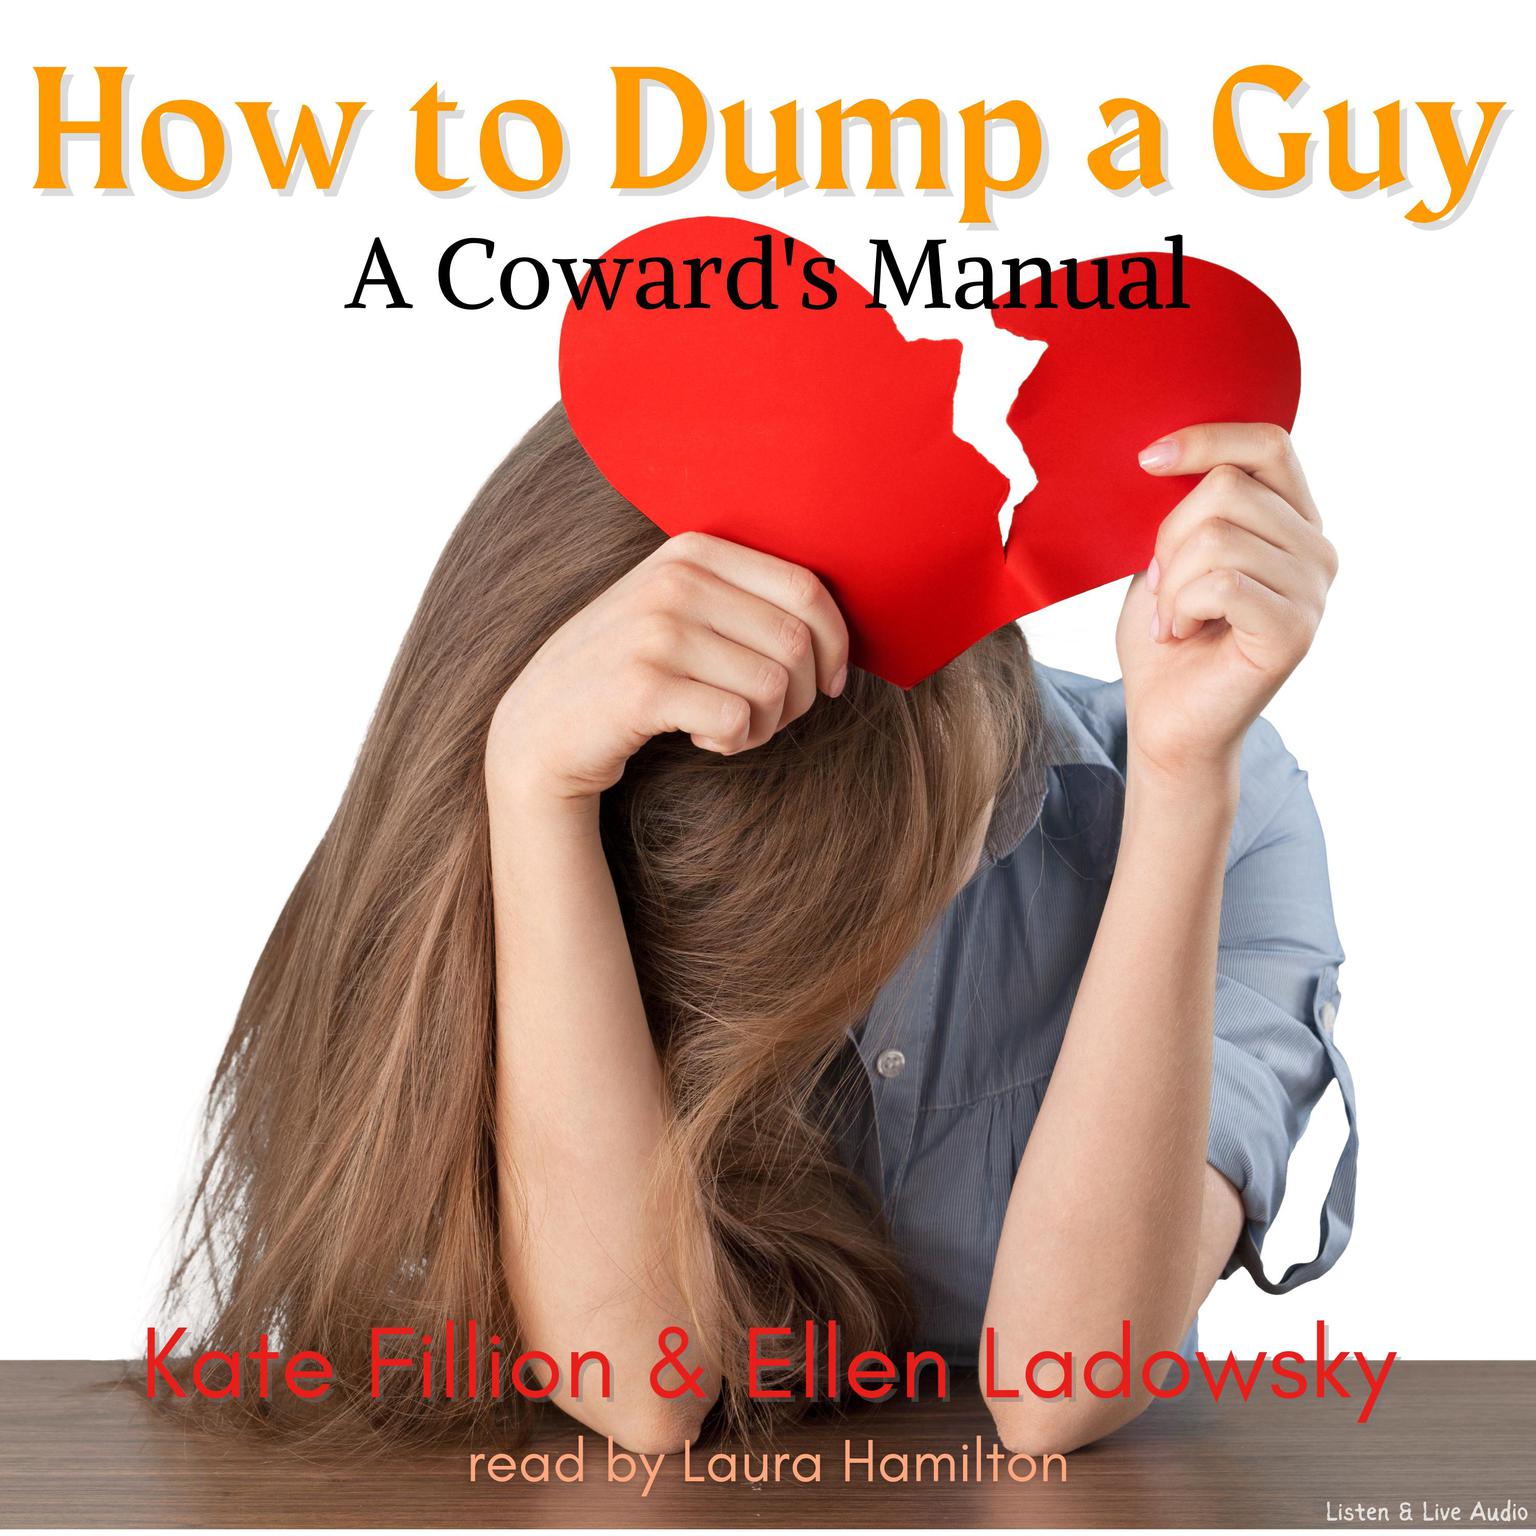 How To Dump A Guy: A Coward’s Manual Audiobook, by Kate Fillion